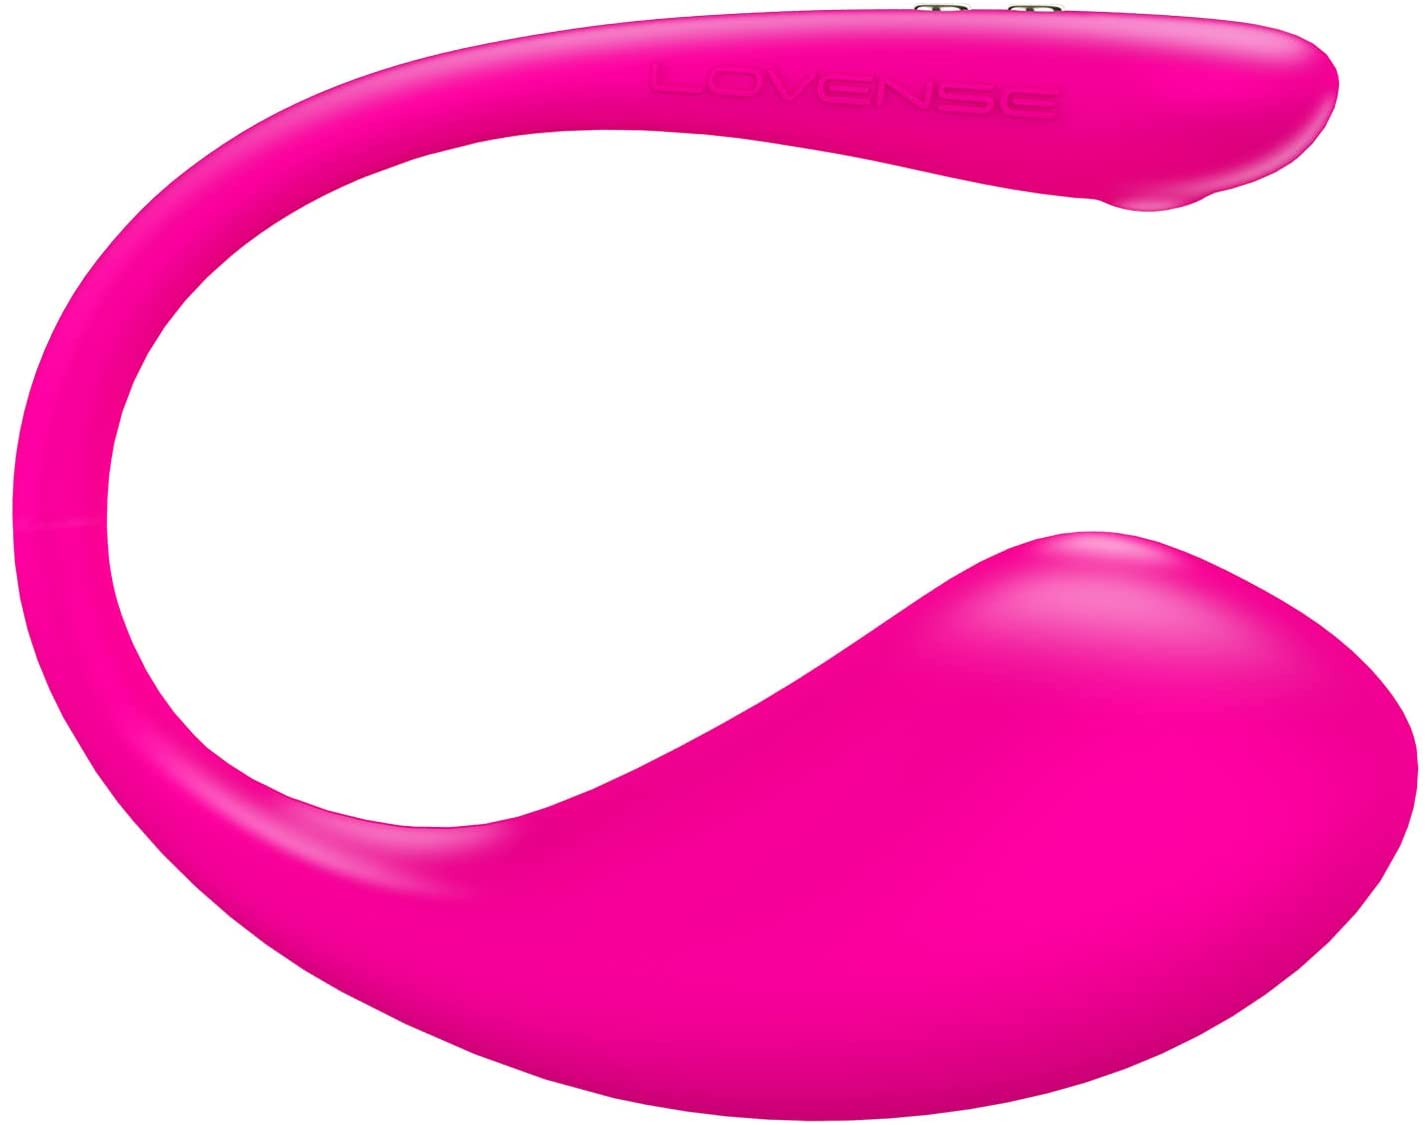 Lush 3 now considered best selling remote control rabbit vibrator 2022